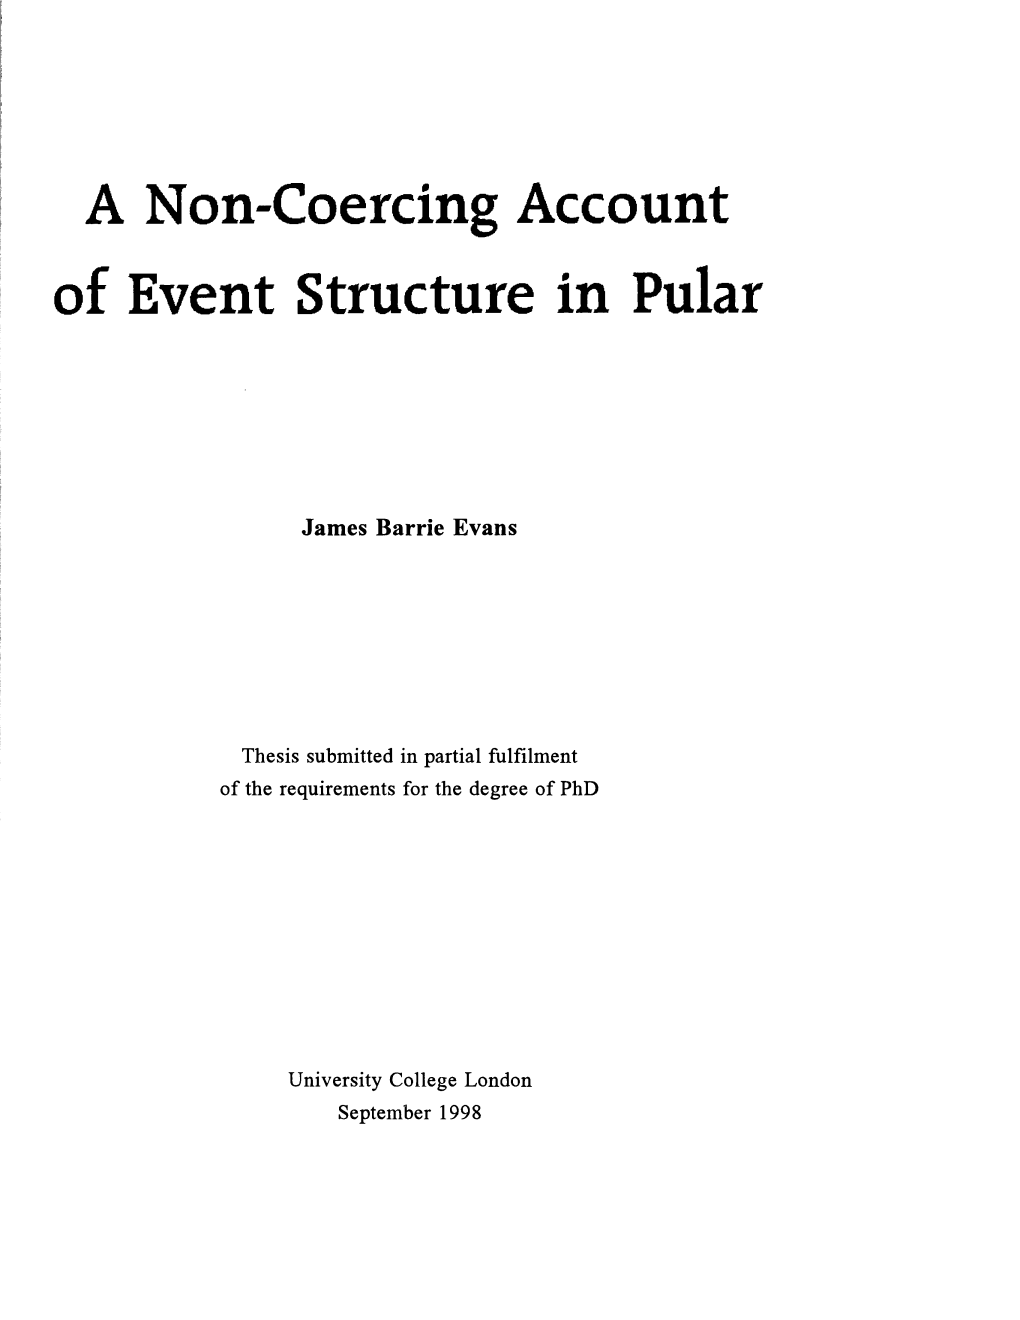 A Non-Coercing Account of Event Structure in Pular